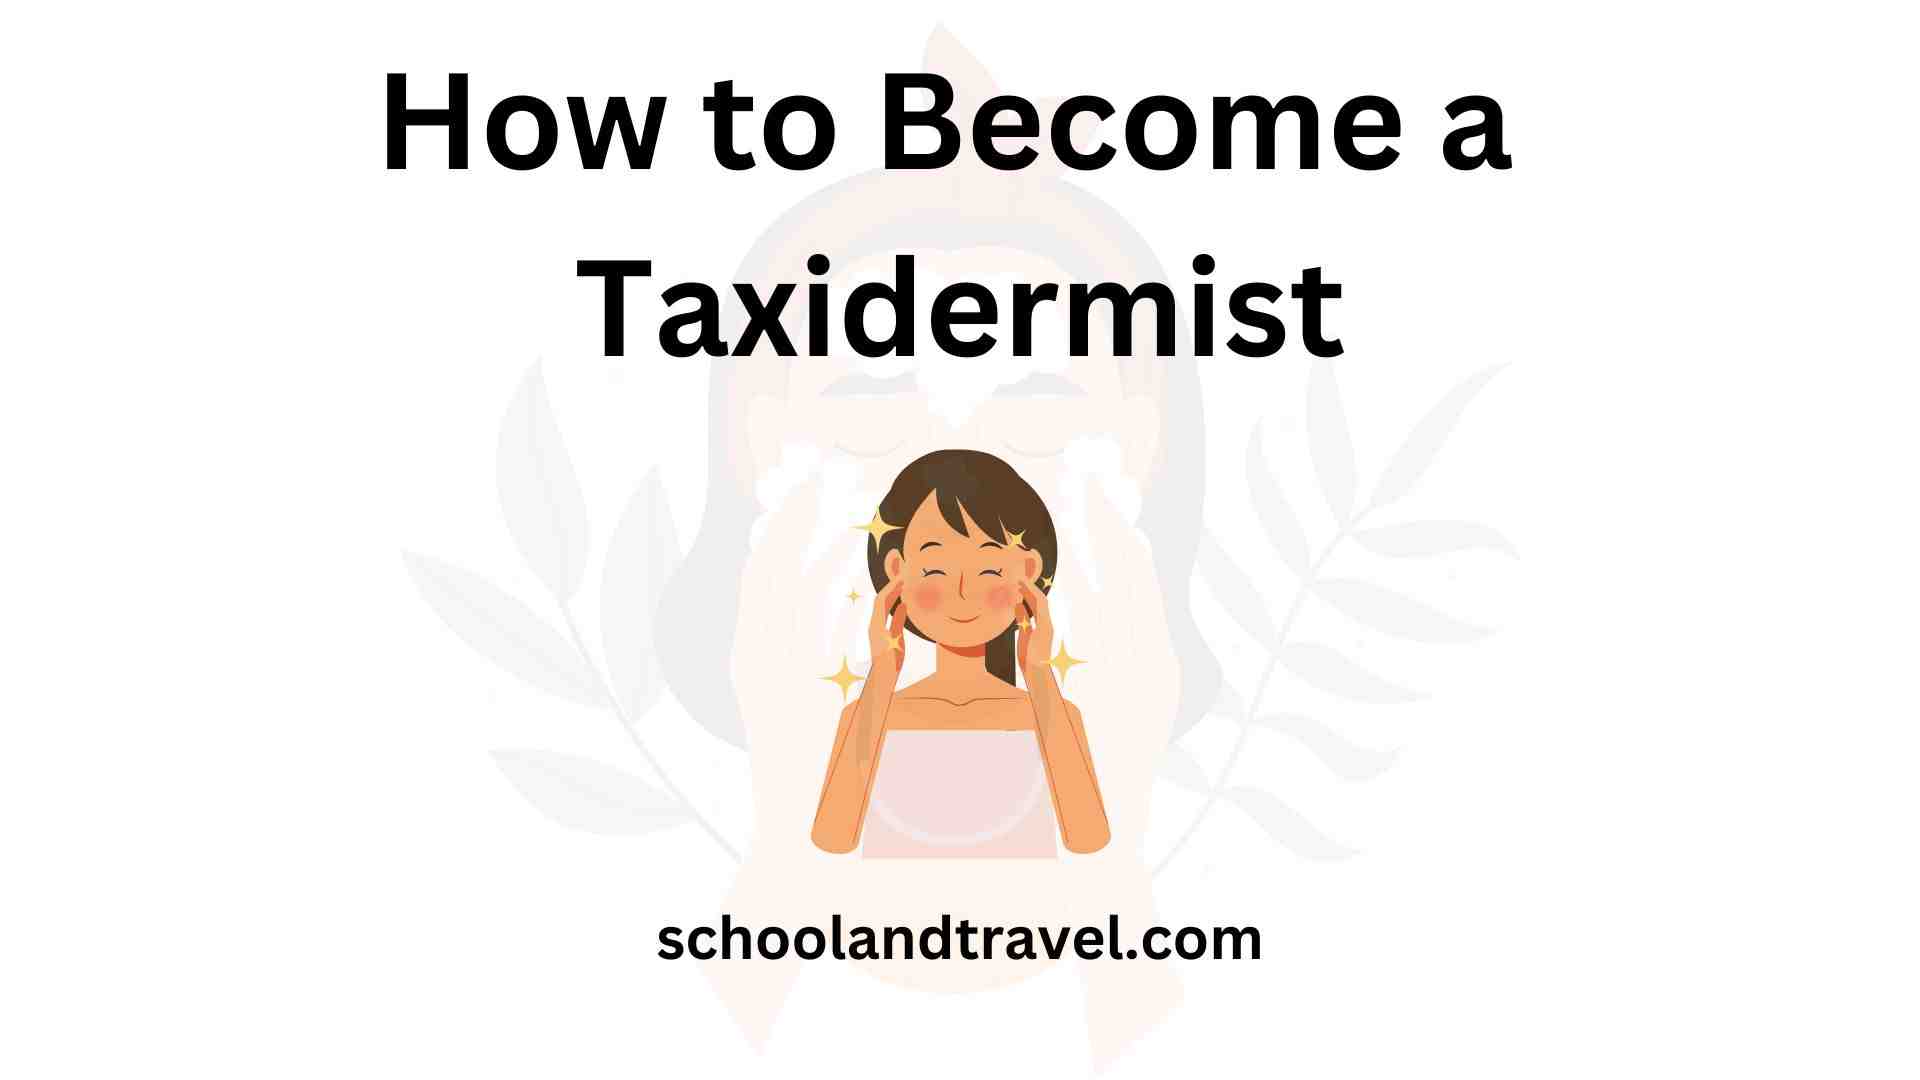 How to Become a Taxidermist